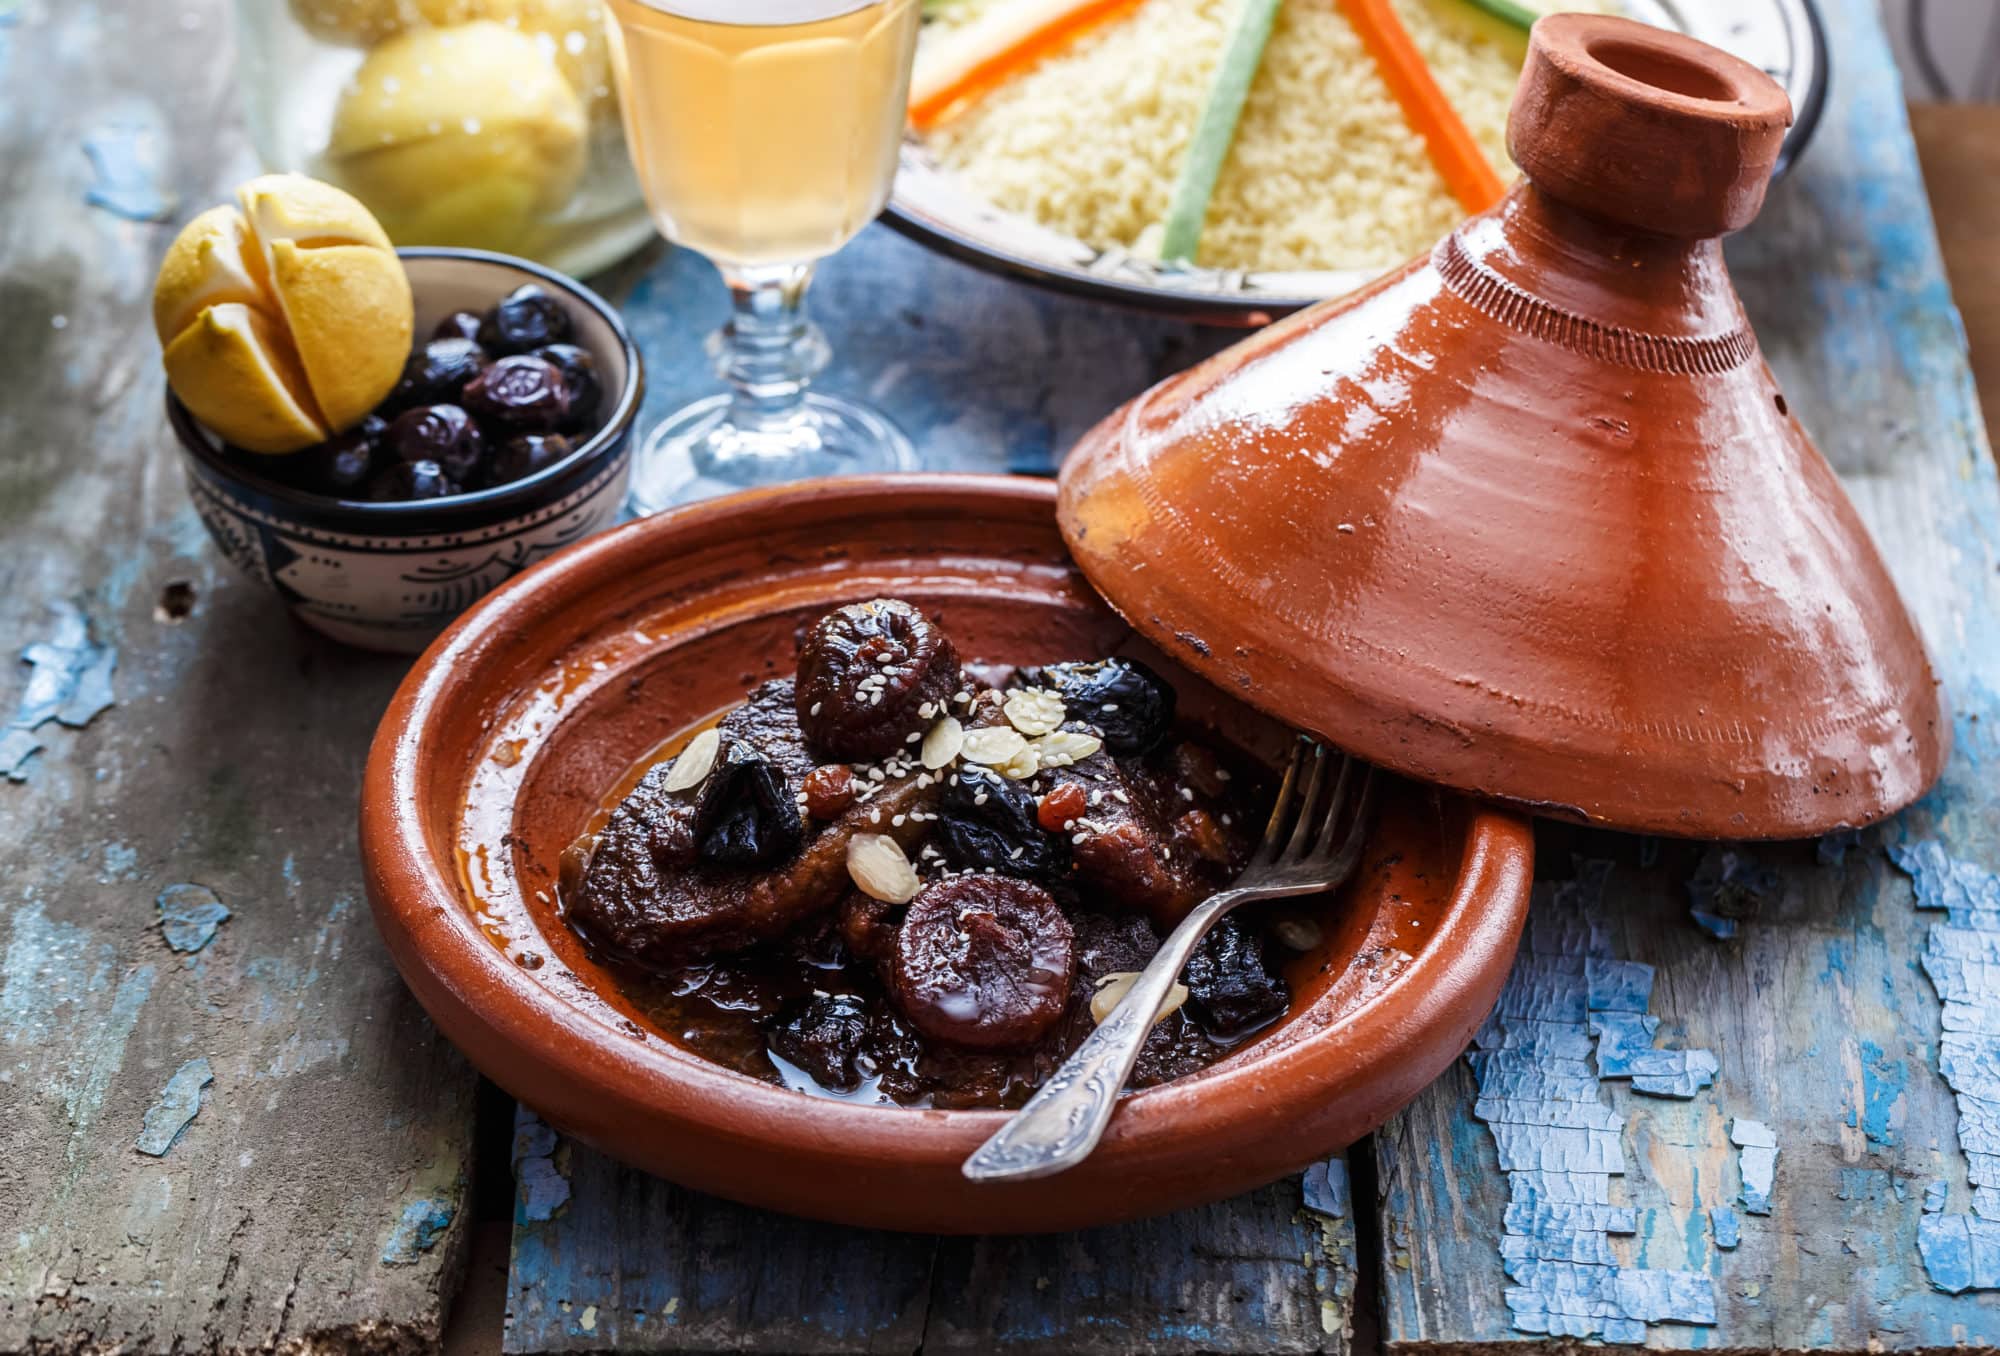 Slow cooked beef with prunes, figs, raisins and almonds - moroccan tajine